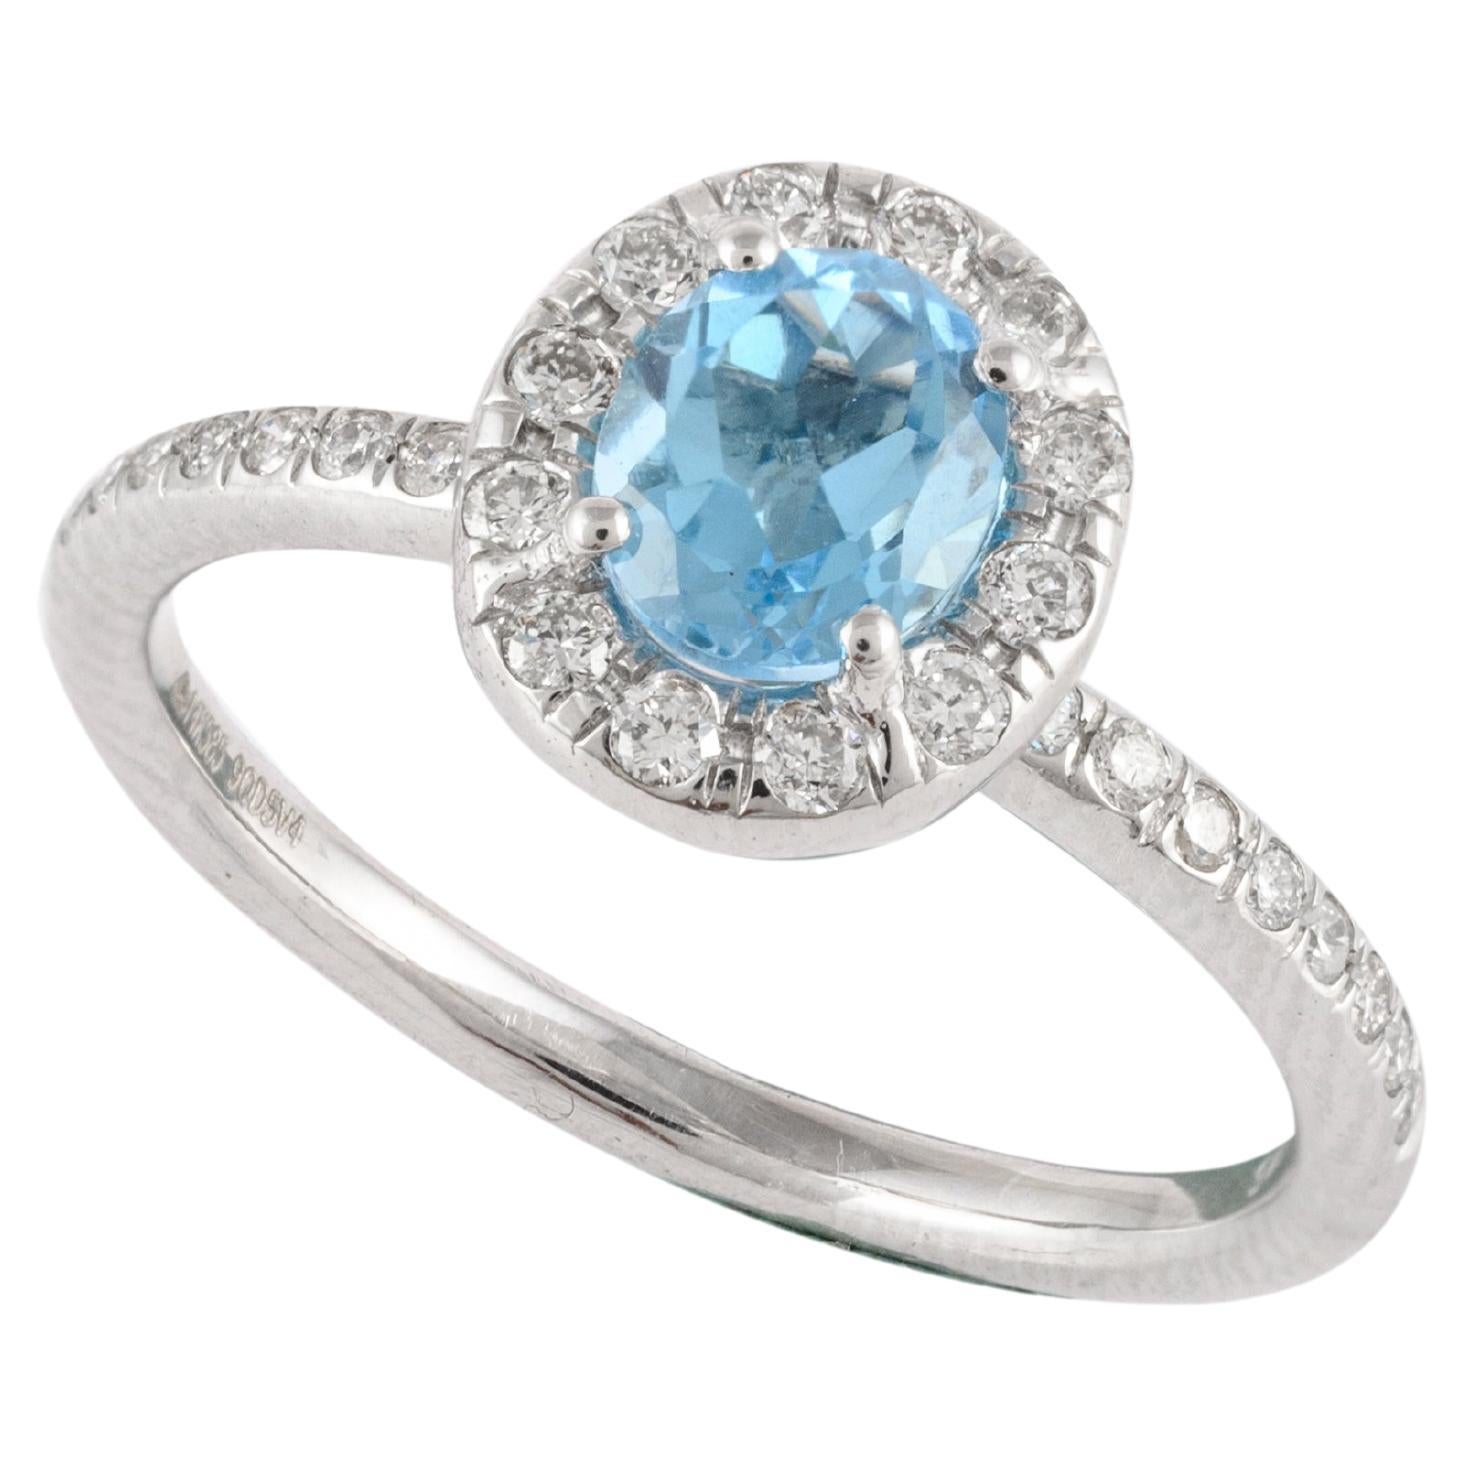 For Sale:  Dainty Blue Topaz and Diamond Halo Engagement Ring 14kt Solid White Gold